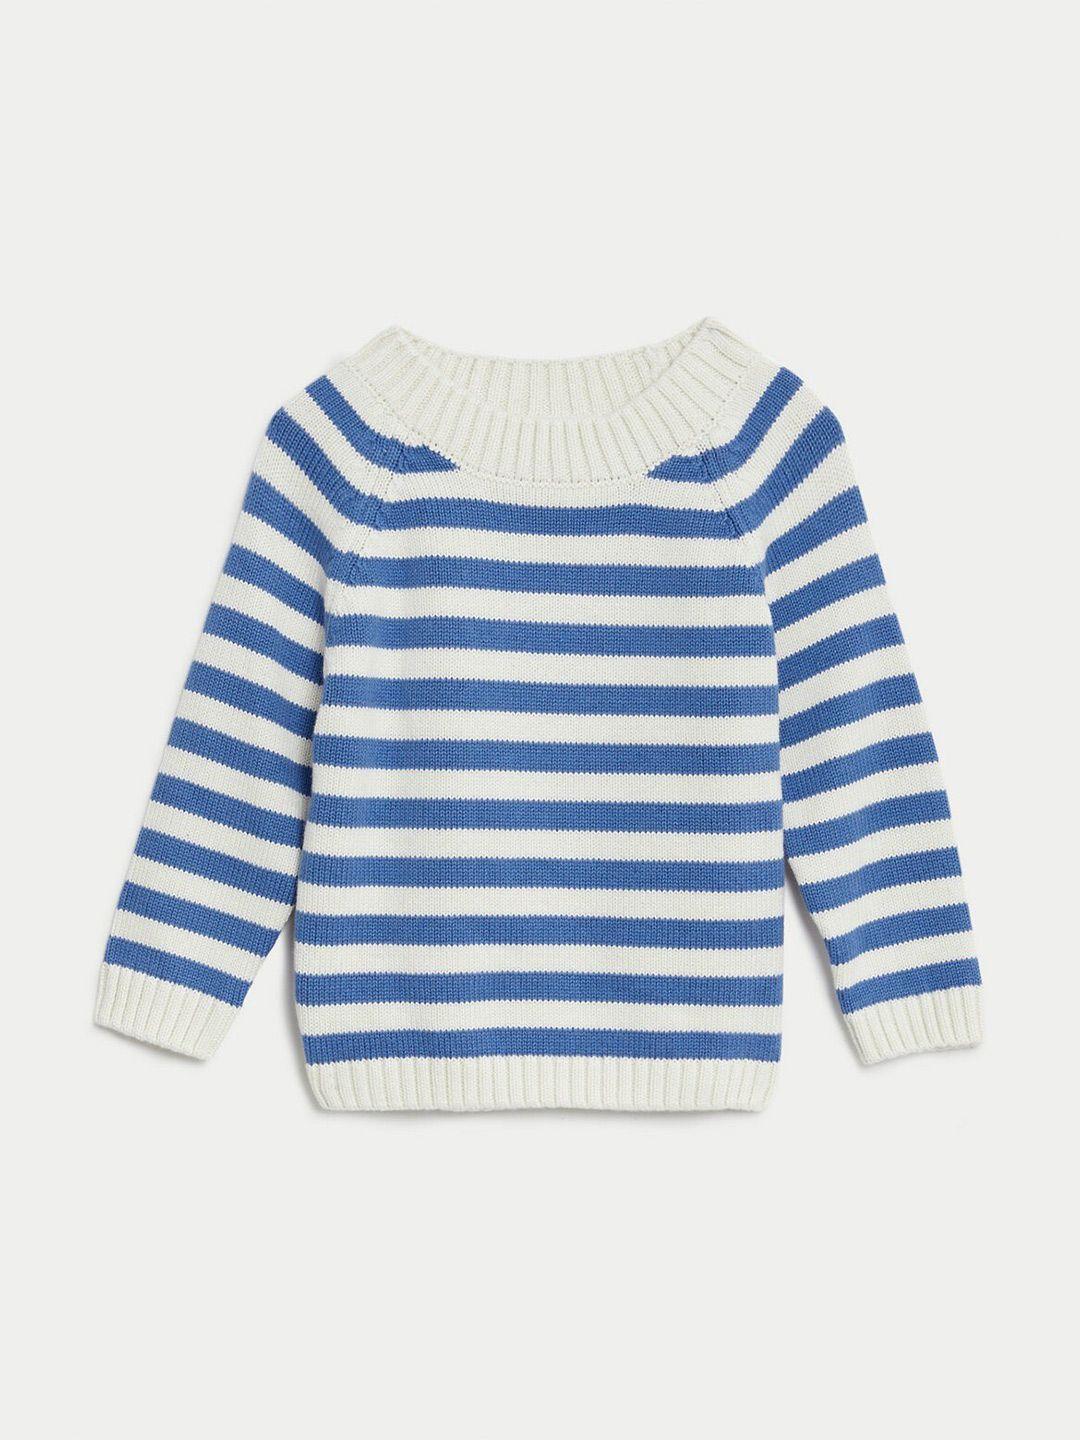 marks-&-spencer-boys-striped-pure-cotton-pullover-sweater